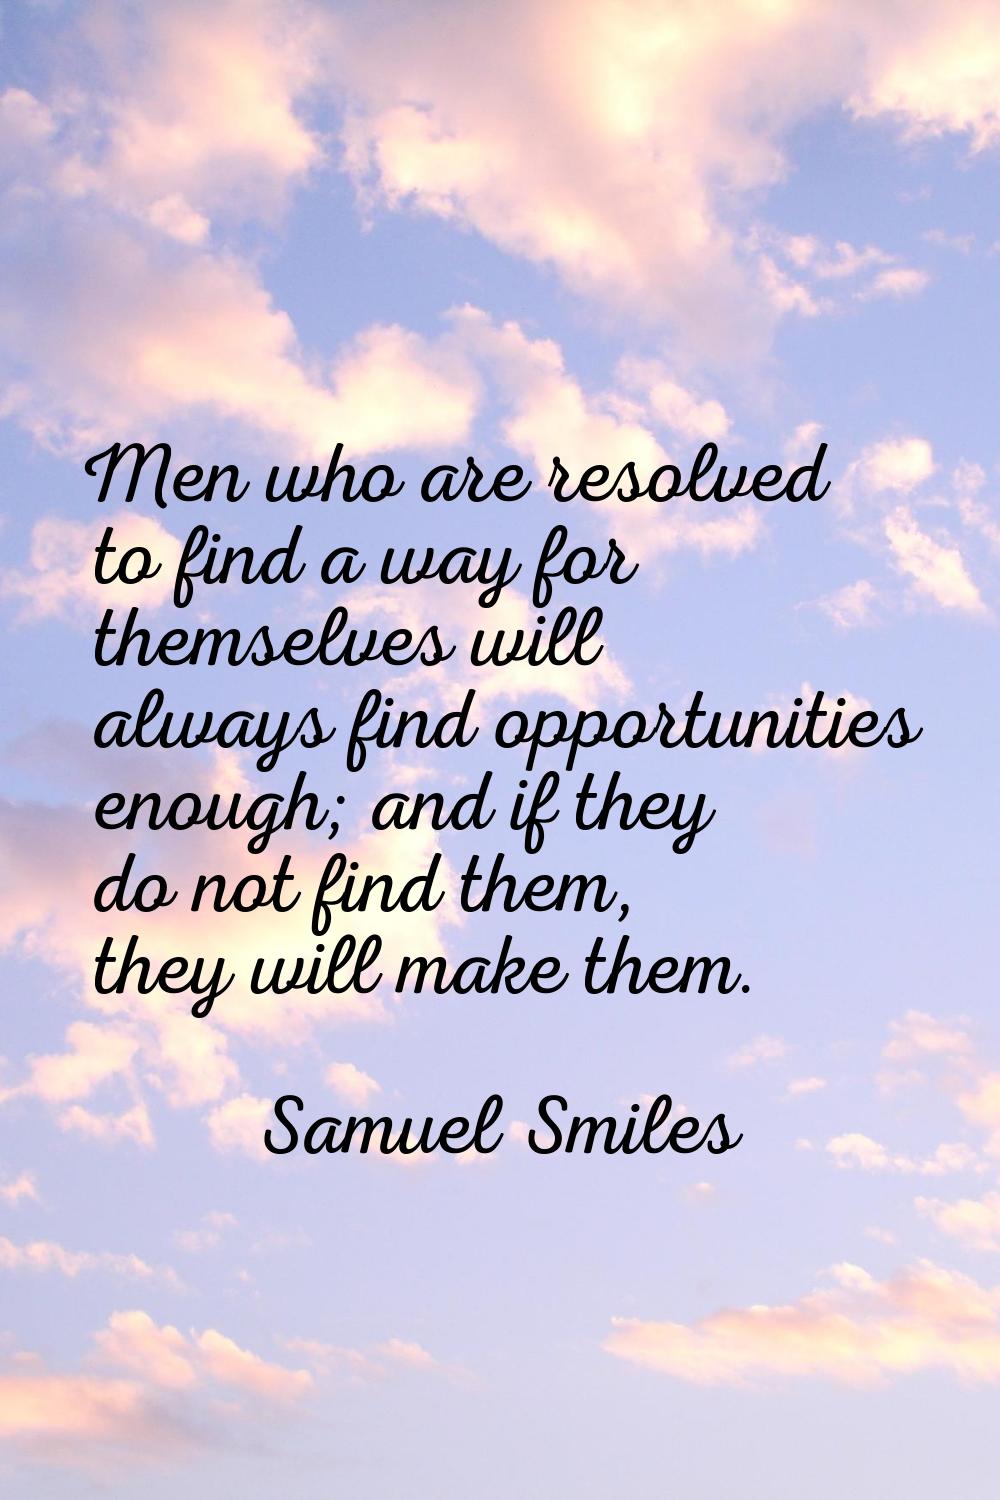 Men who are resolved to find a way for themselves will always find opportunities enough; and if the